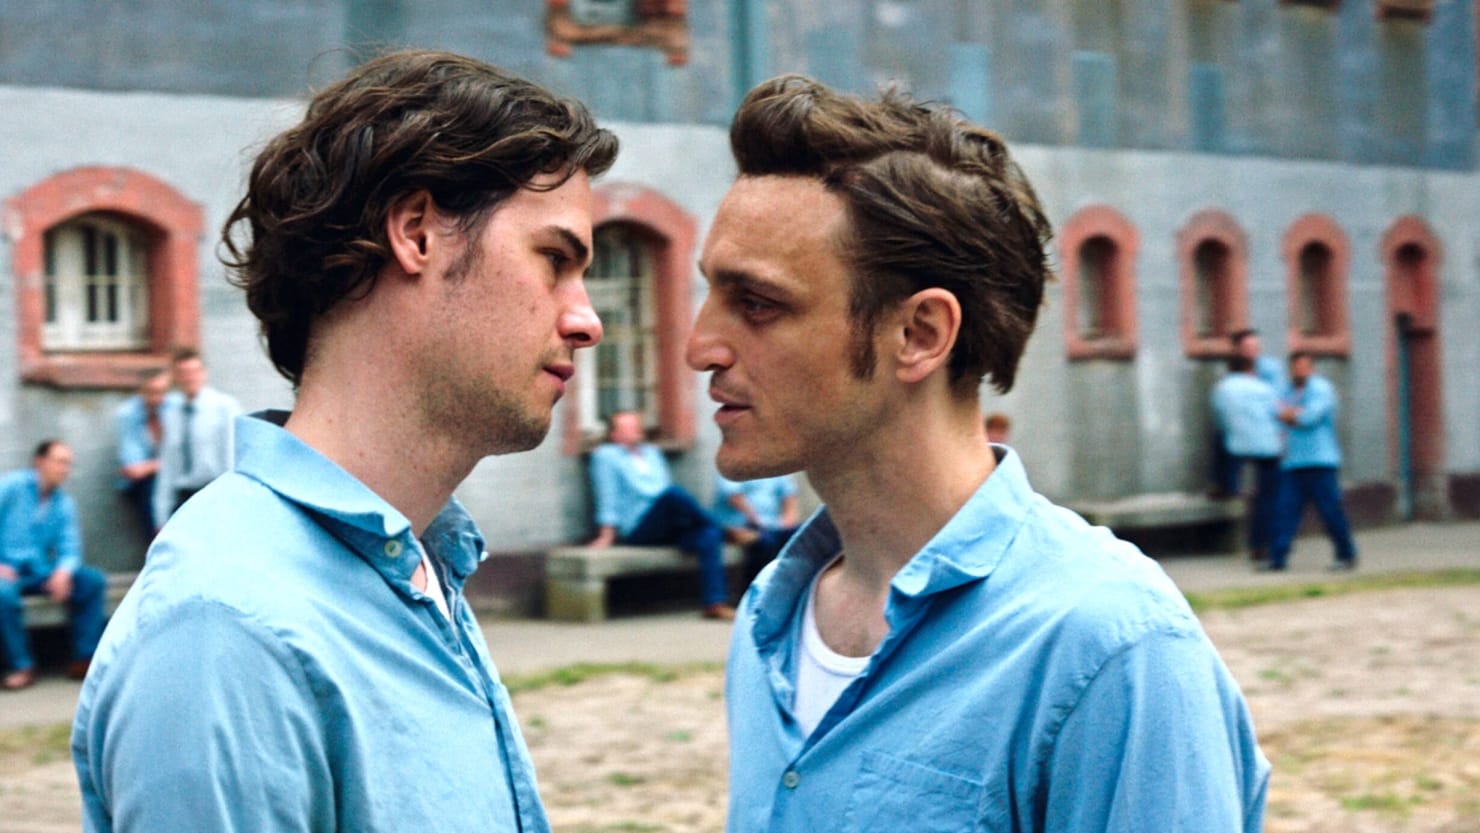 ‘Great Freedom’ Provides a Raw, Uncompromising Look at the Persecution of Gay Men in East Germany